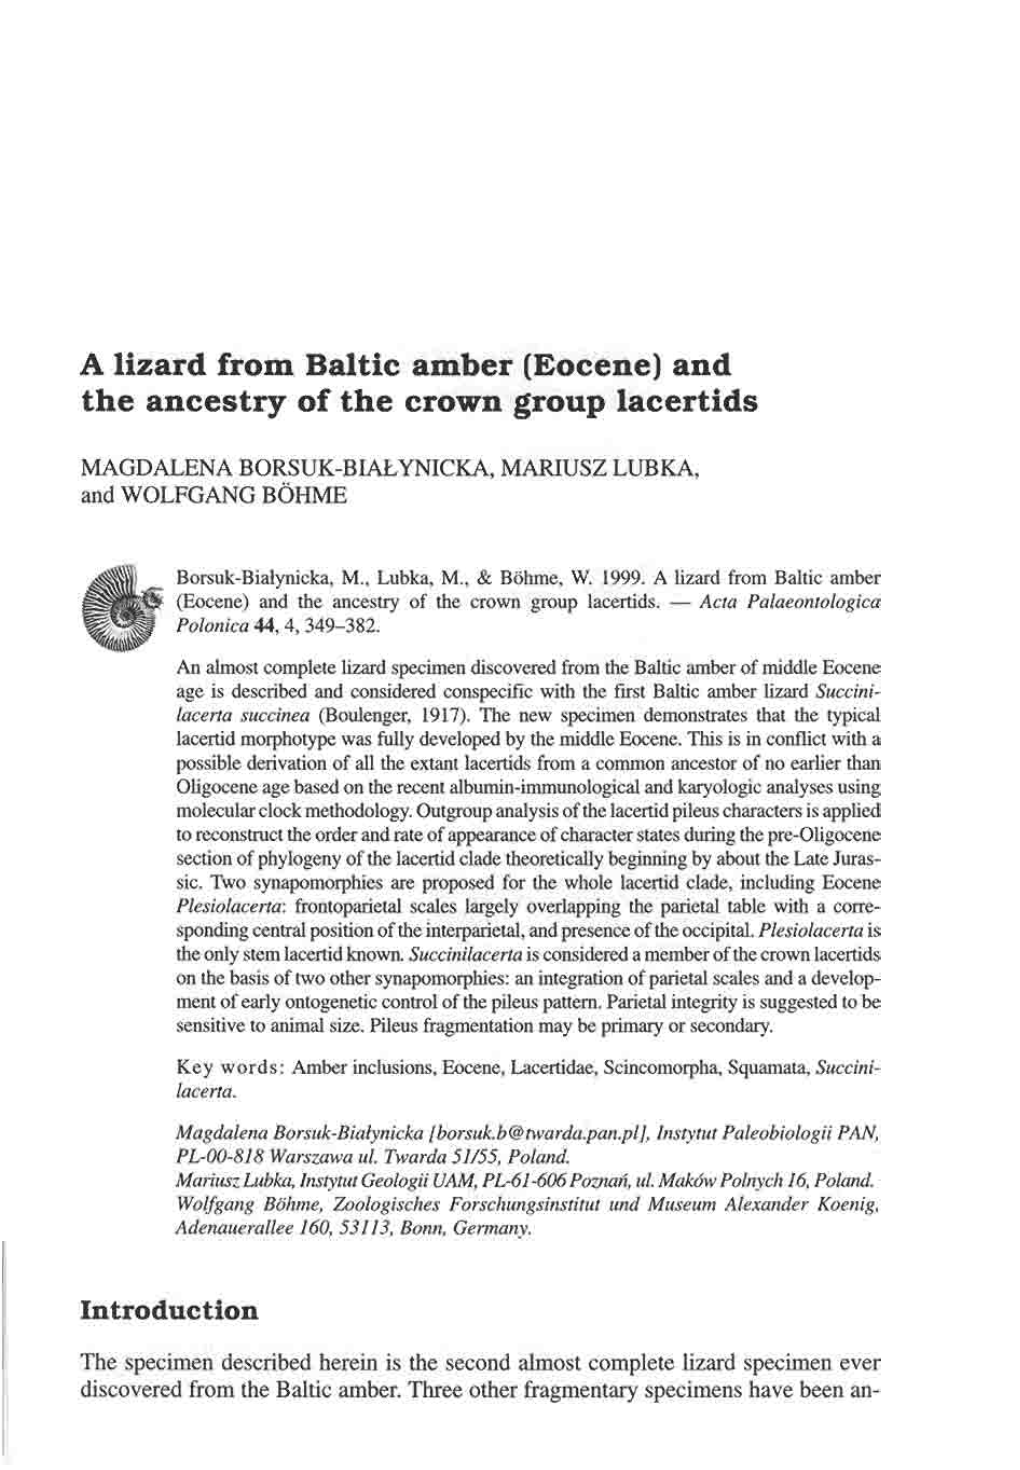 Alizard from Baltic Amber (Eocene) and the Ancestry of the Crown Group Lacertids